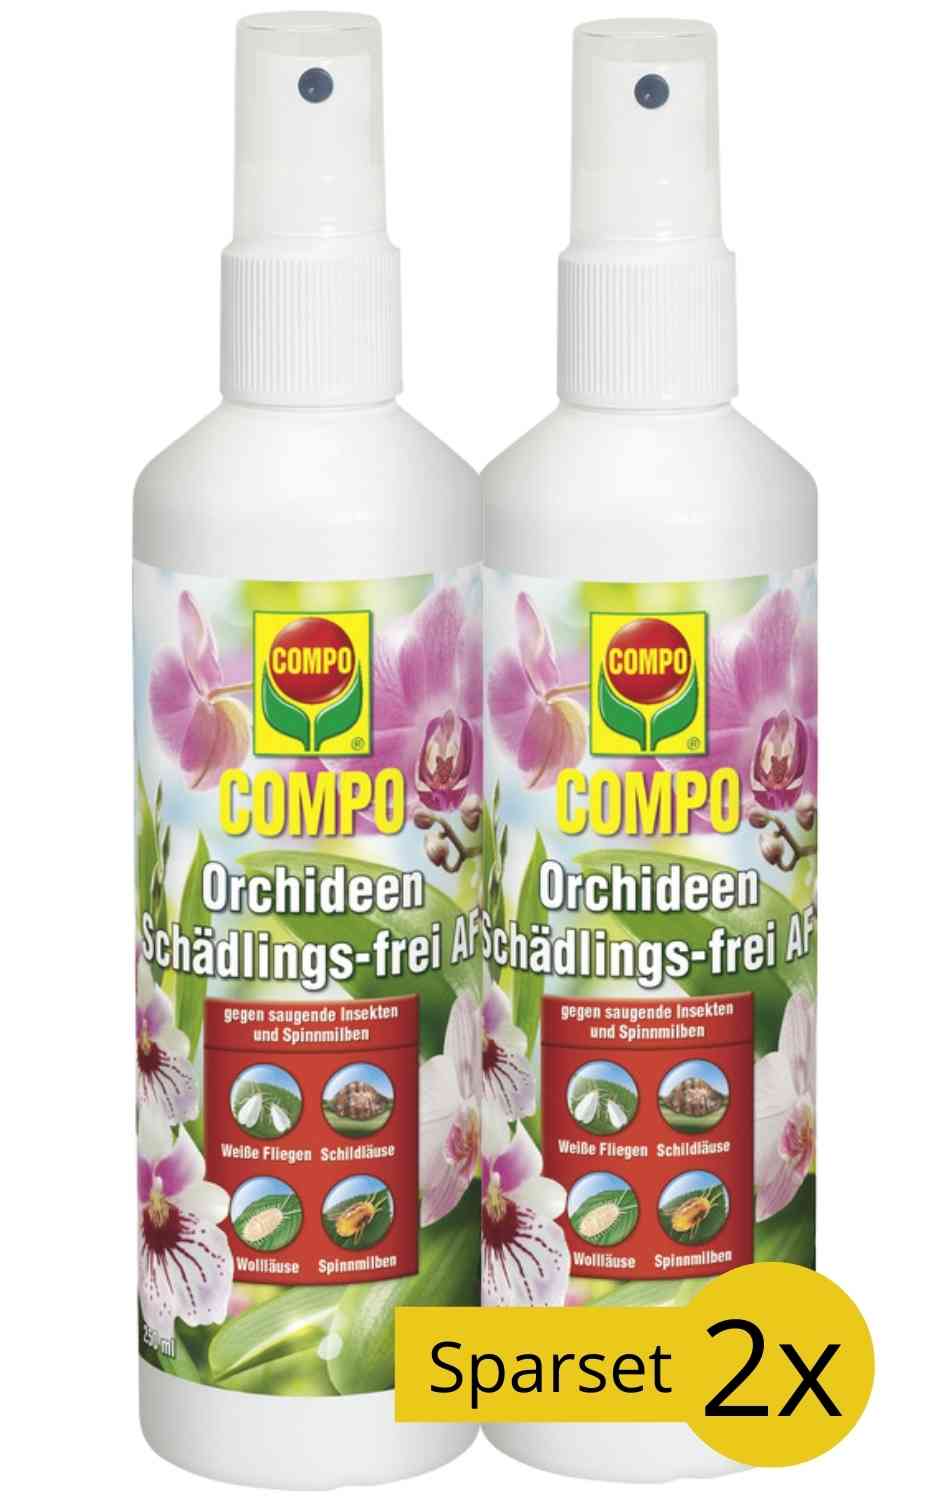 Compo Orchideen Schädlings-frei AF